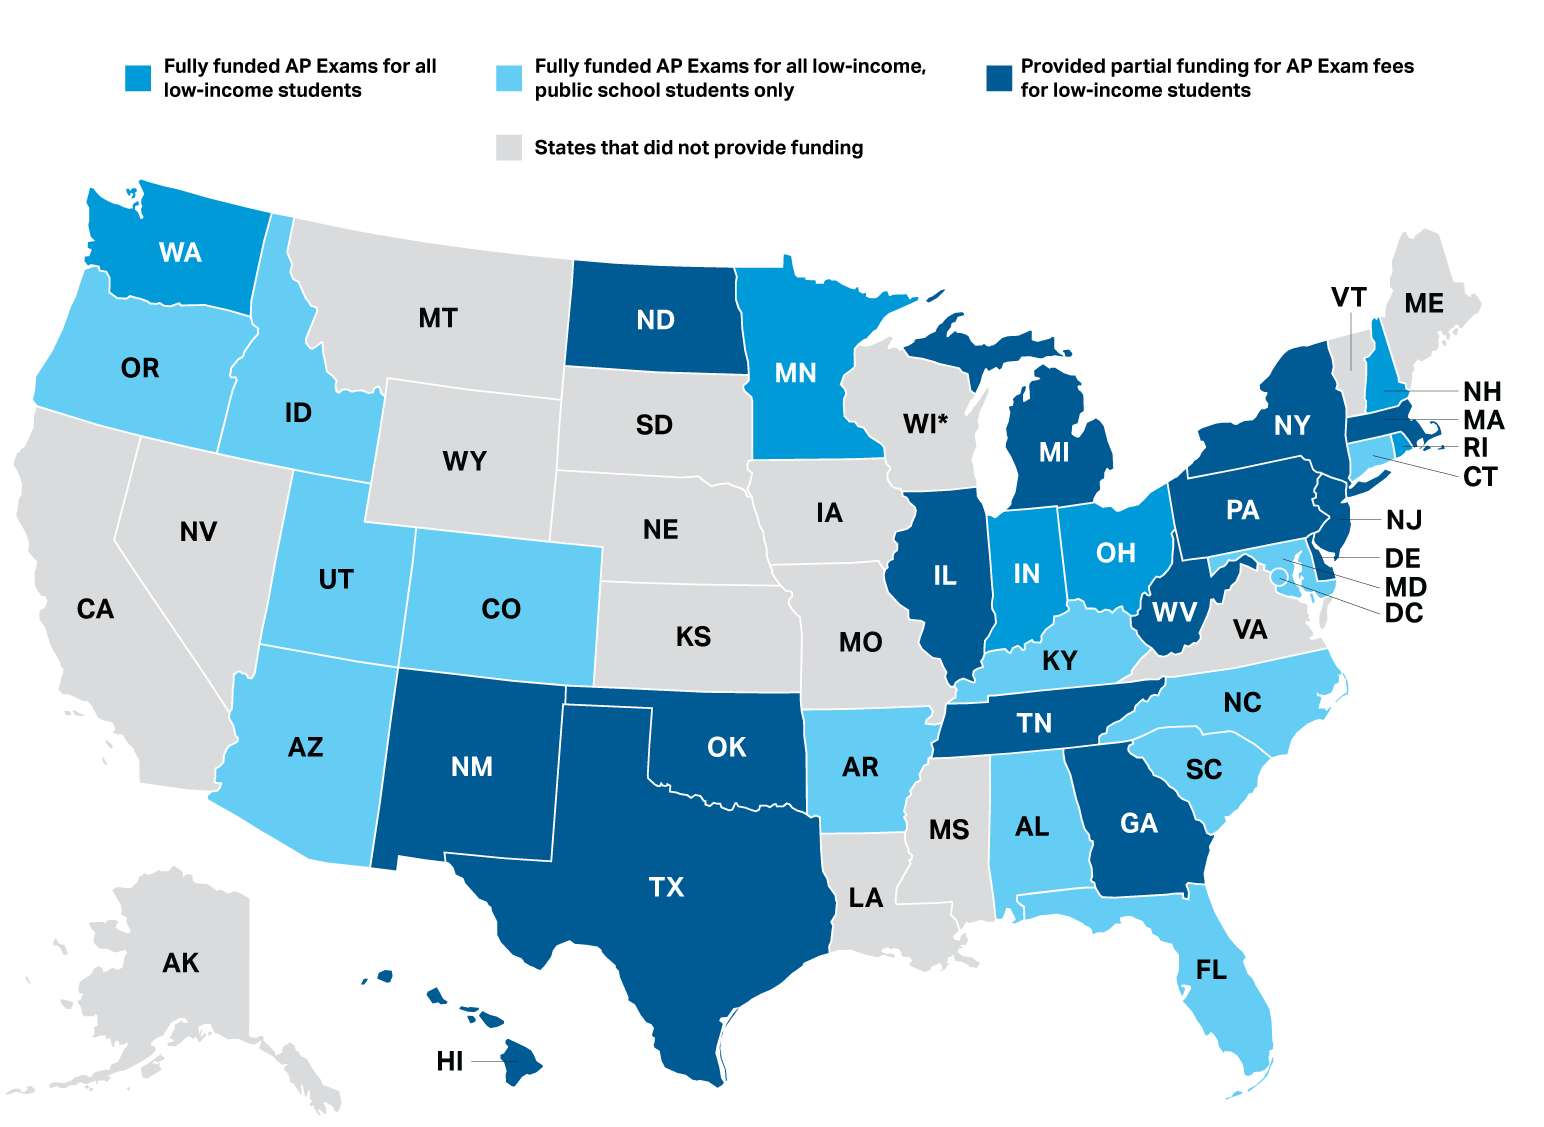 An image shows the political map of the United States of America marking all 50 states. It shows the states that provided funding for 2023  . The data presented is as follows: Fully funded A P exams for all low-income students: WA, MN, IN, OH, NH, and RI. Fully funded A P exams for all low-income public school students only: OR, ID, UT, CO, AZ, AR, KY, AL, NC, SC, FL, DC, MD, and CT. Provided partial funding for A P exam fees for low-income students: ND, NM, OK, TX, IL, MI, TN, GA, WV, PA, NY, DE, NJ, MA, and HI. States that did not provide funding: CA, NV, MT, WY, SD, NE, KS, IA, MO, LA, MS, WI (marked with asterisk), VA, VT, ME, and AK. Asterisk signifies “Wisconsin districts are required by law to cover the cost of AP Exams for low-income students.